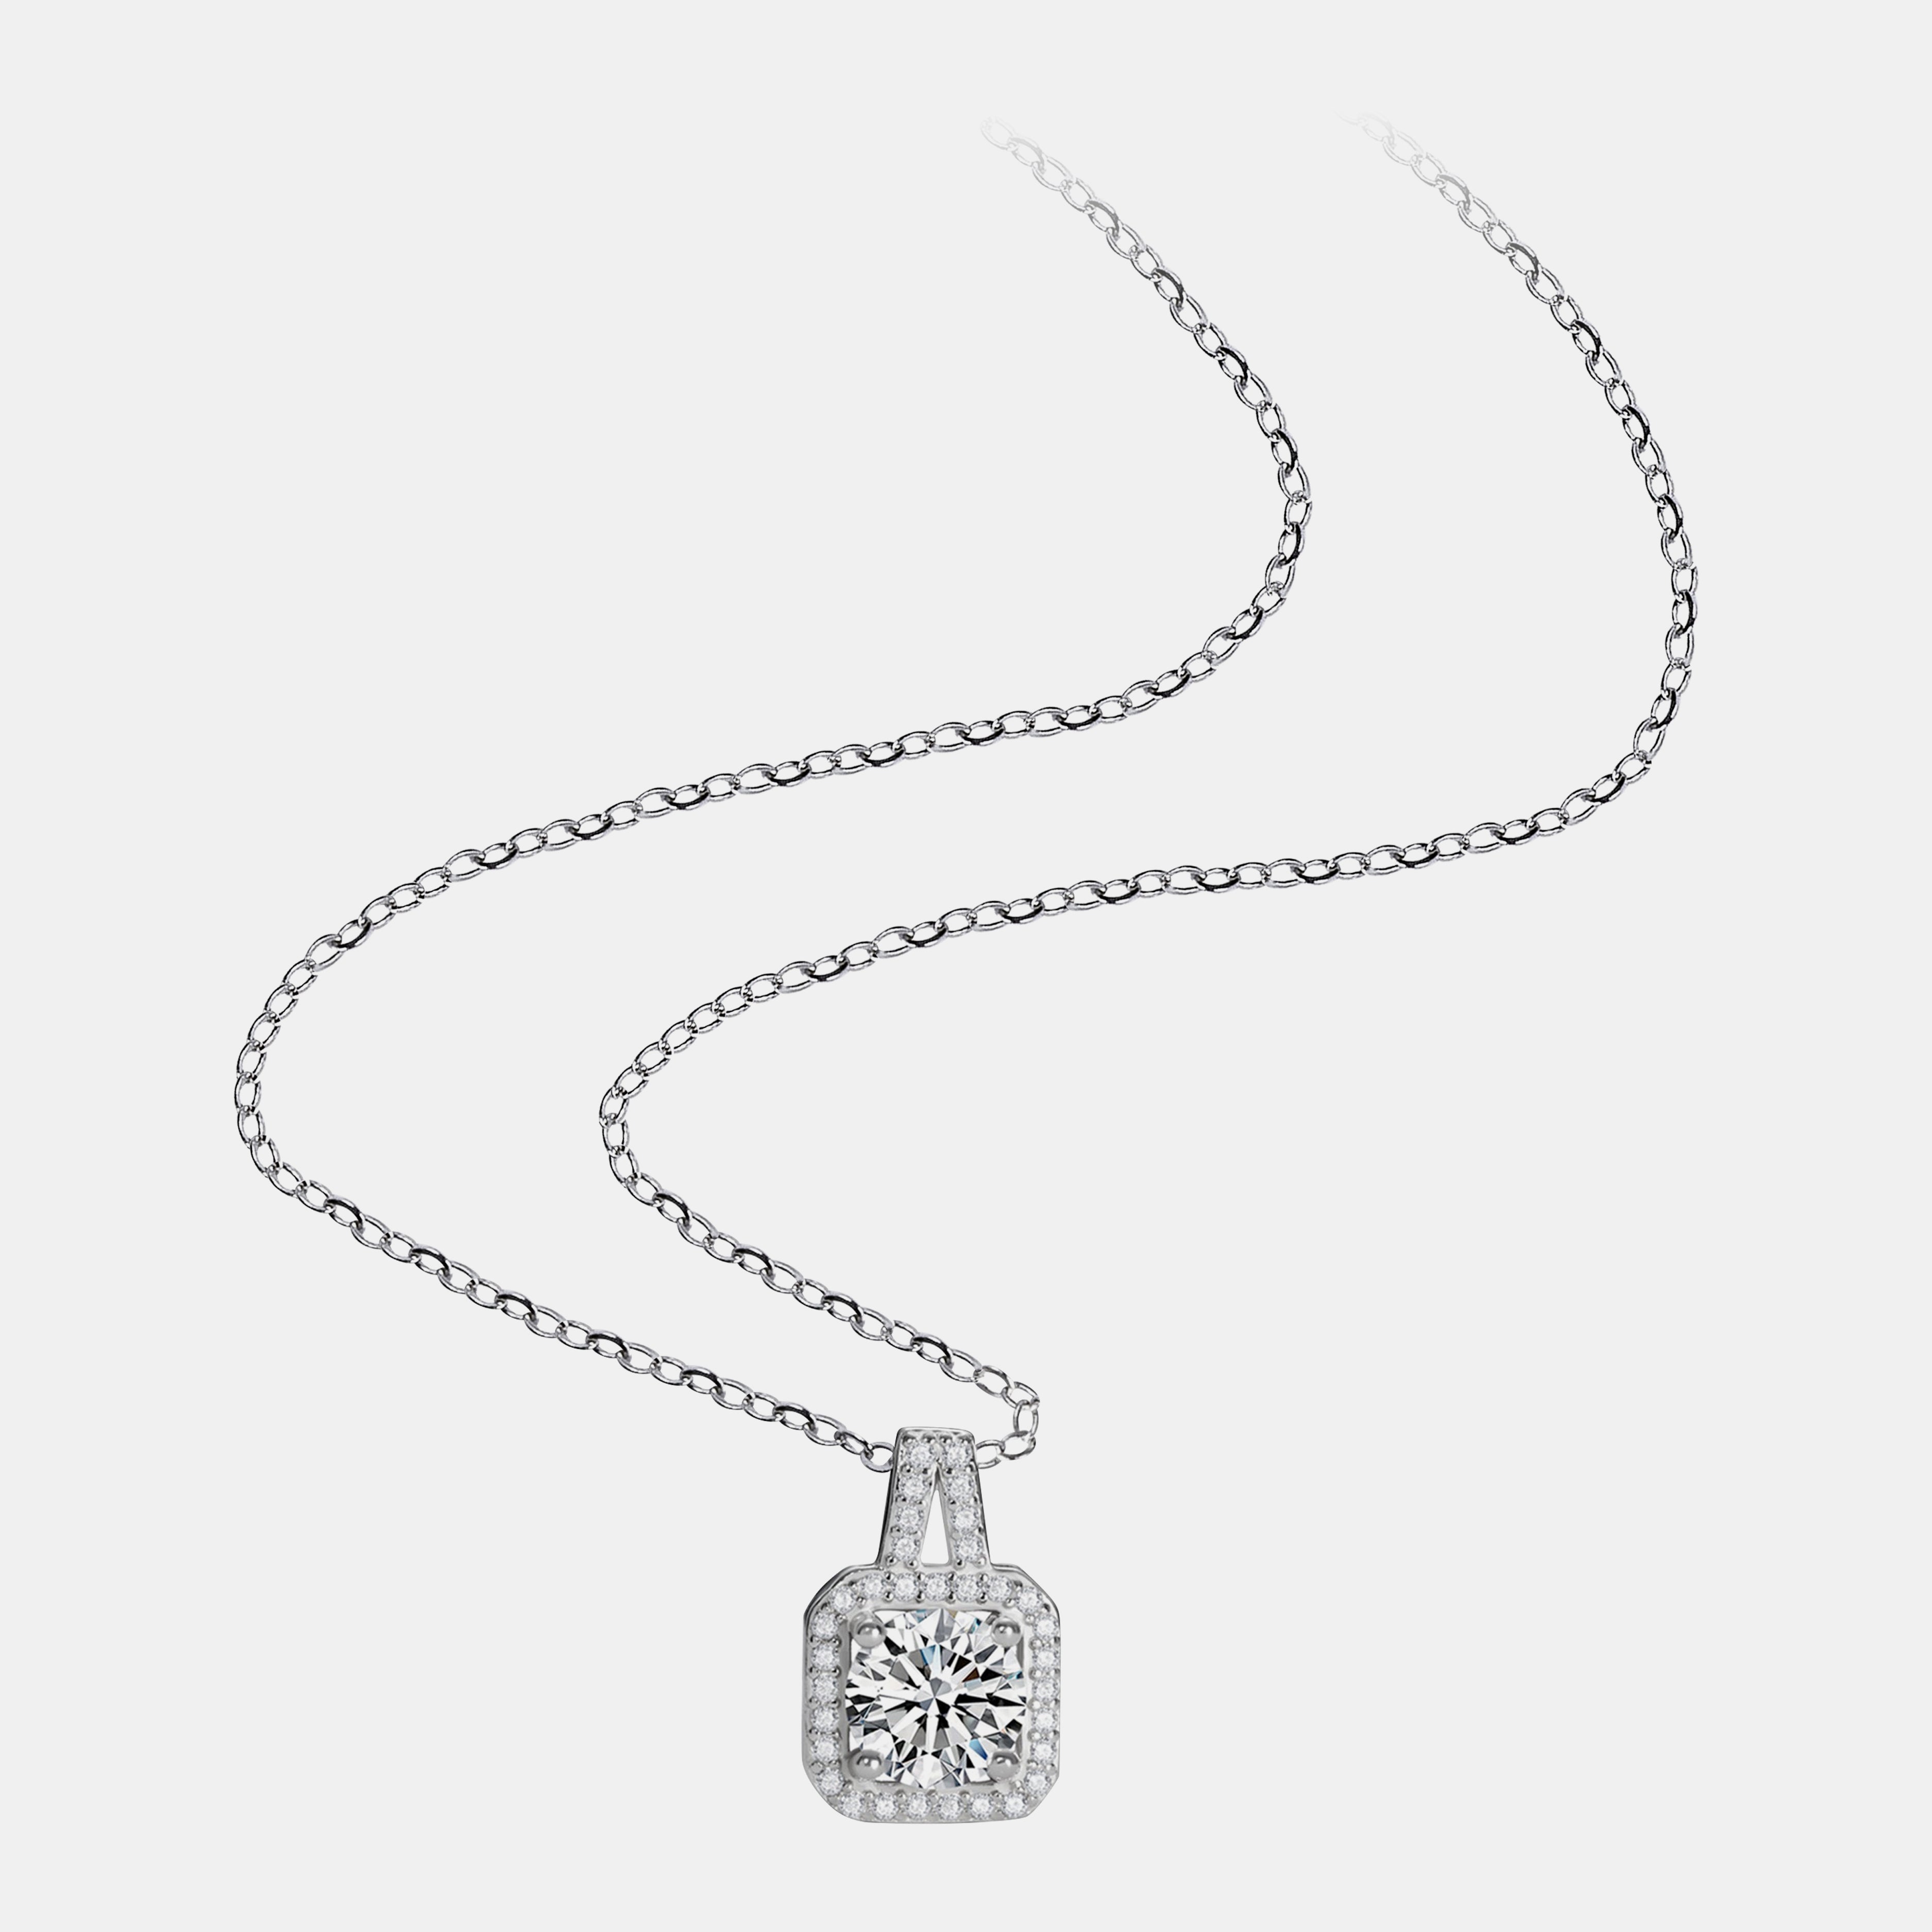 【#20】925 Sterling Silver Moissanite Necklace